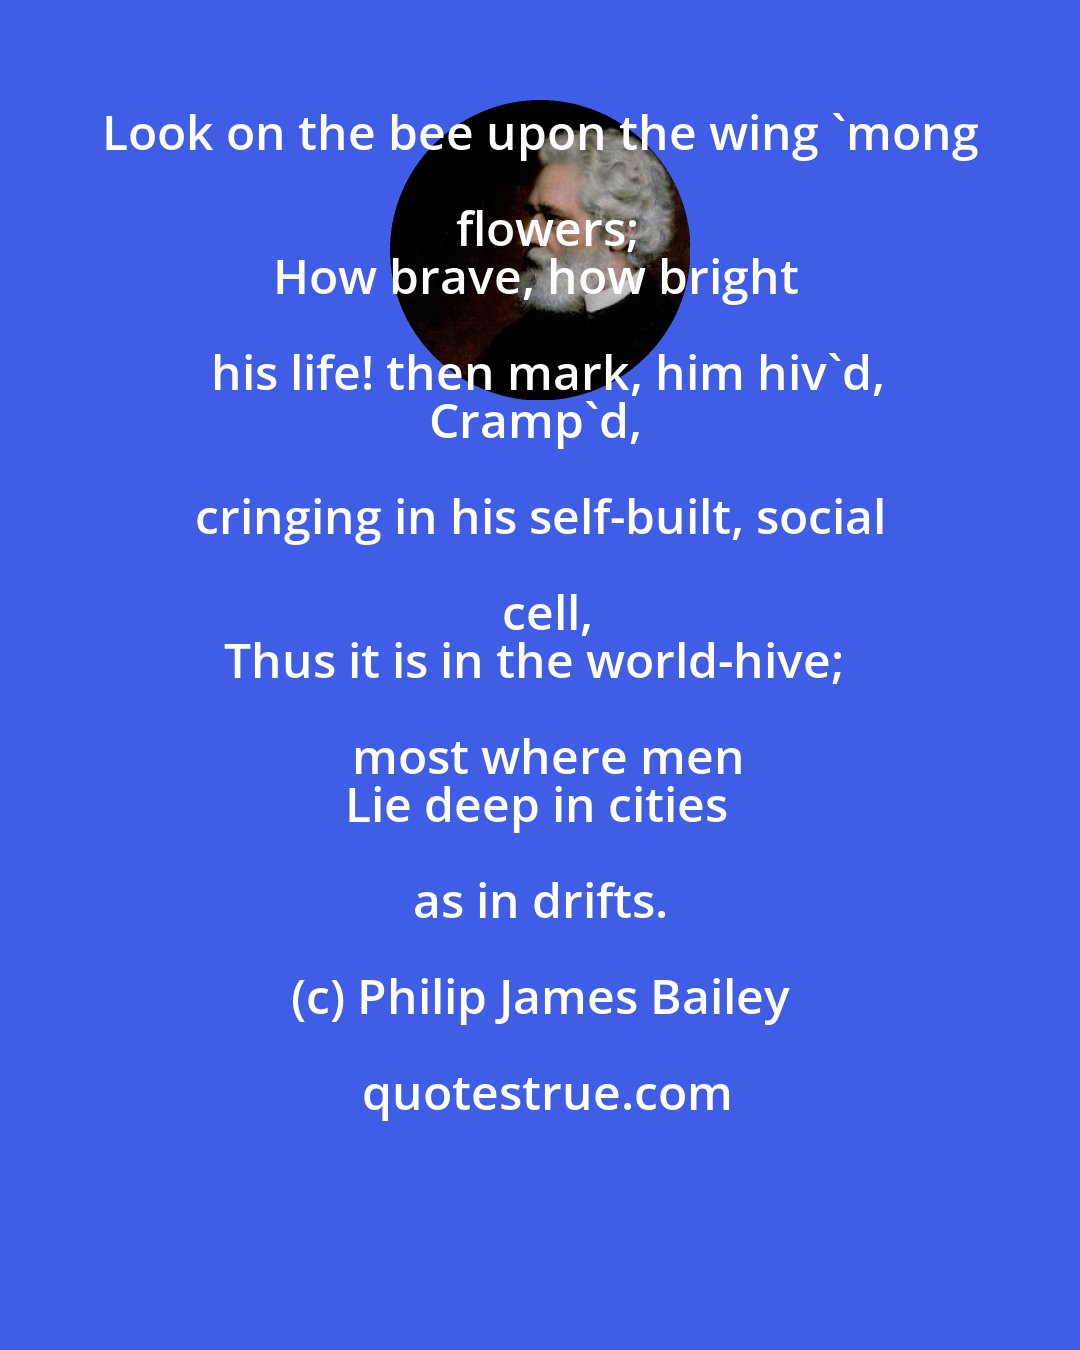 Philip James Bailey: Look on the bee upon the wing 'mong flowers;
How brave, how bright his life! then mark, him hiv'd,
Cramp'd, cringing in his self-built, social cell,
Thus it is in the world-hive; most where men
Lie deep in cities as in drifts.